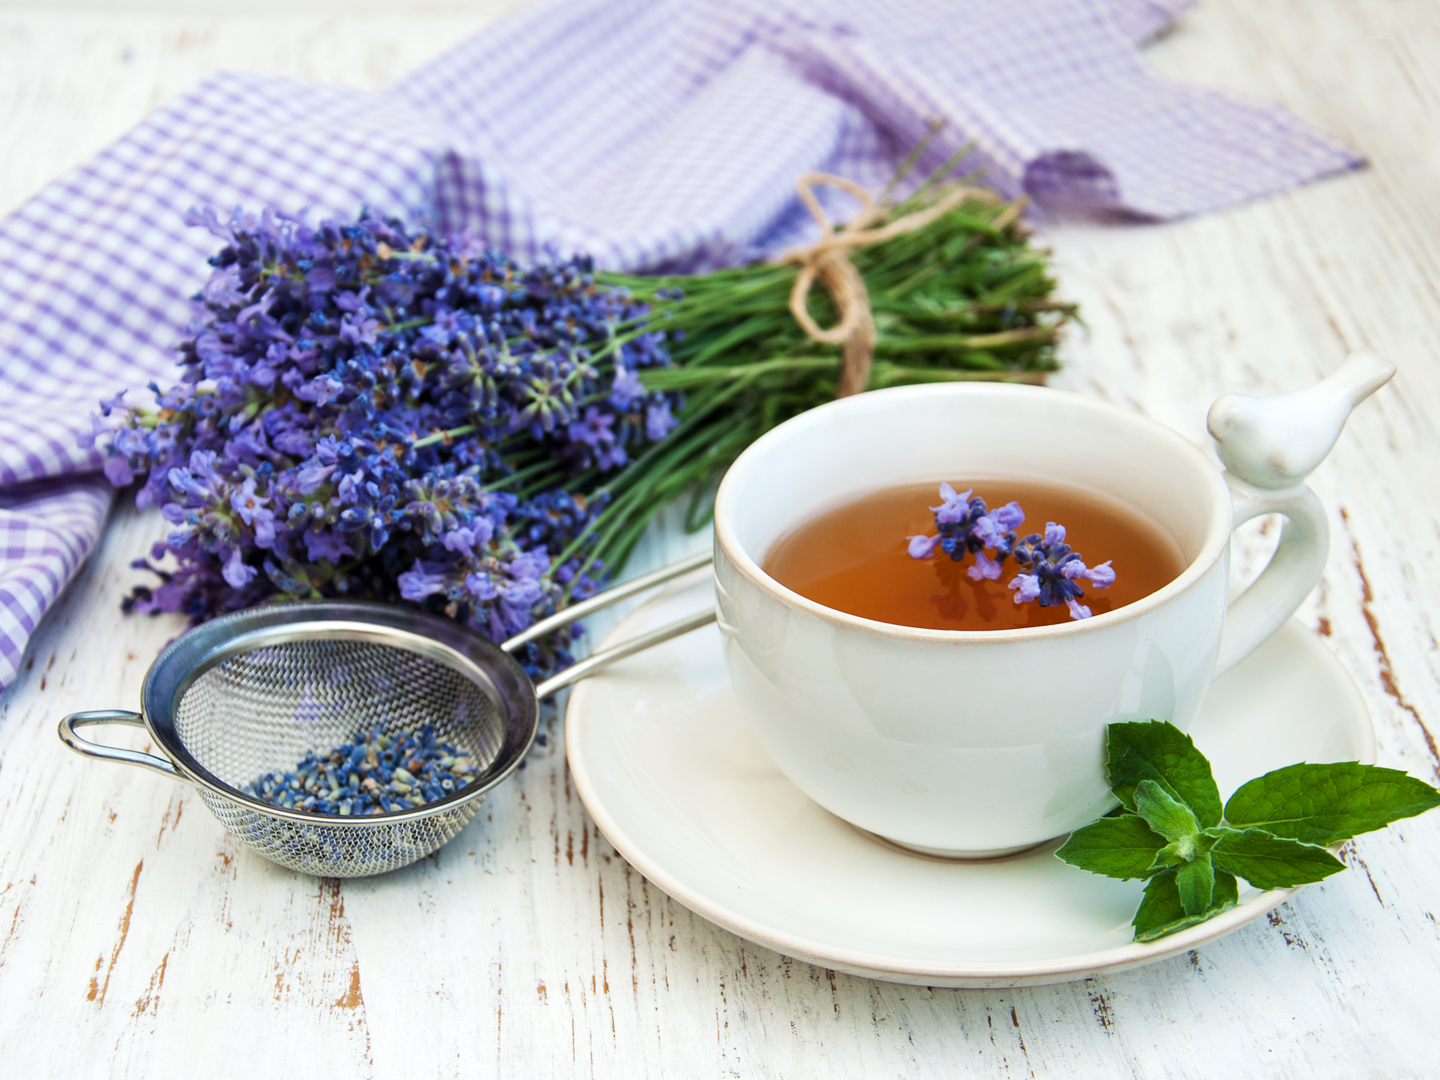 Culinary Uses of Lavender